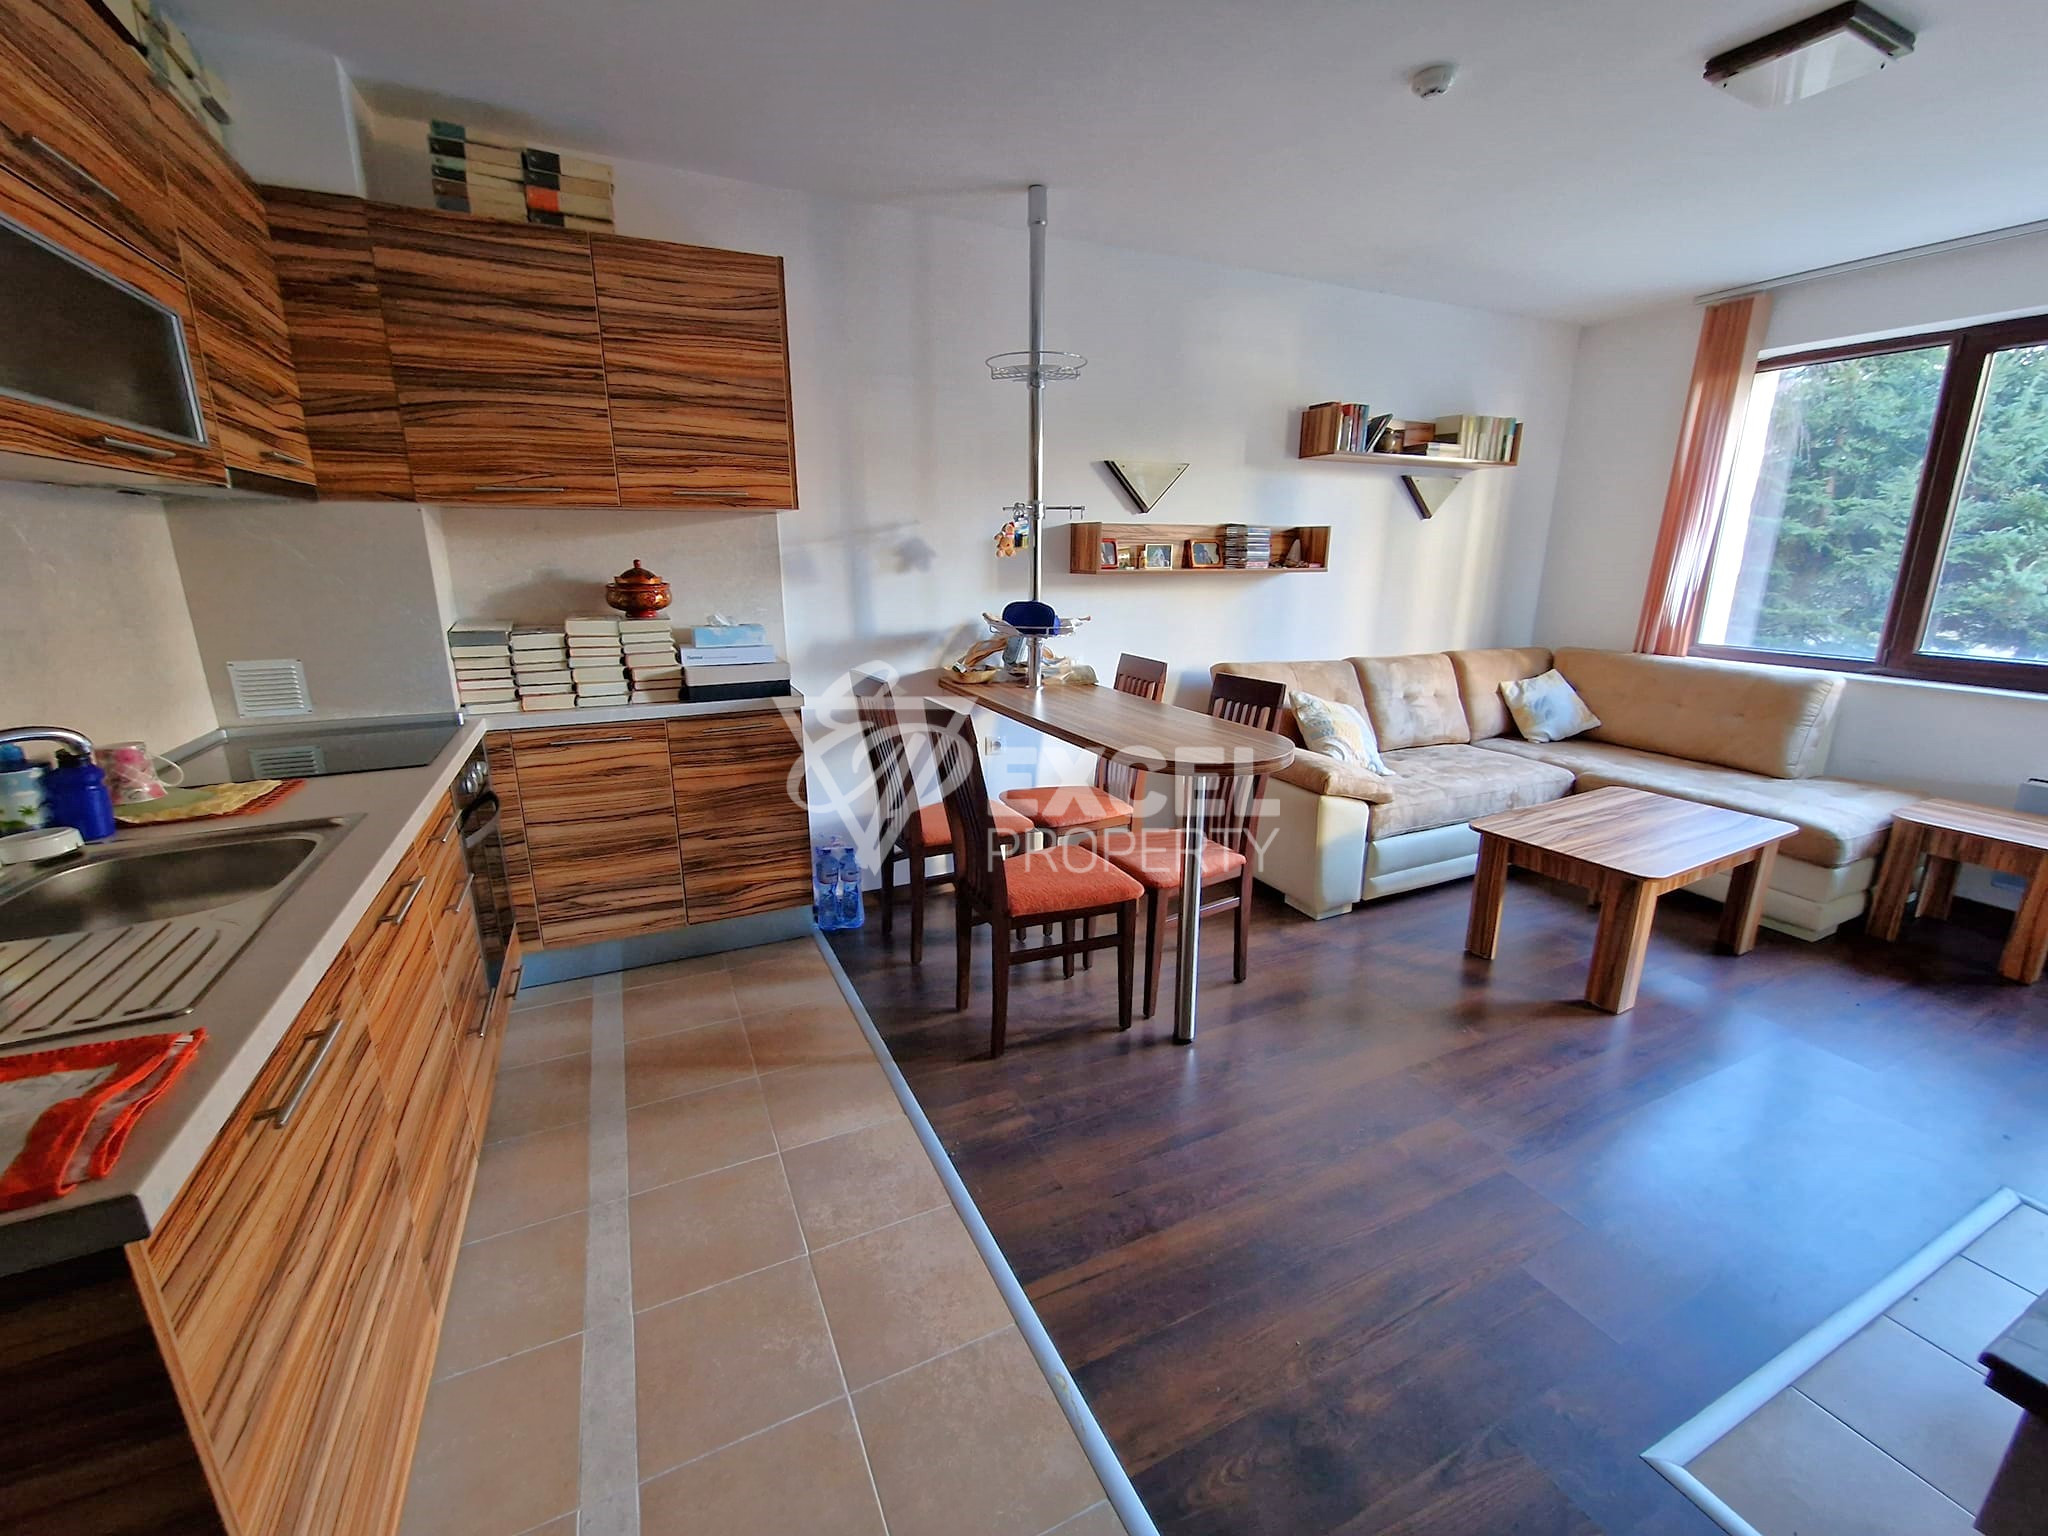 Exclusive two bedroom apartment with a fireplace at a bargain price for sale in Bansko